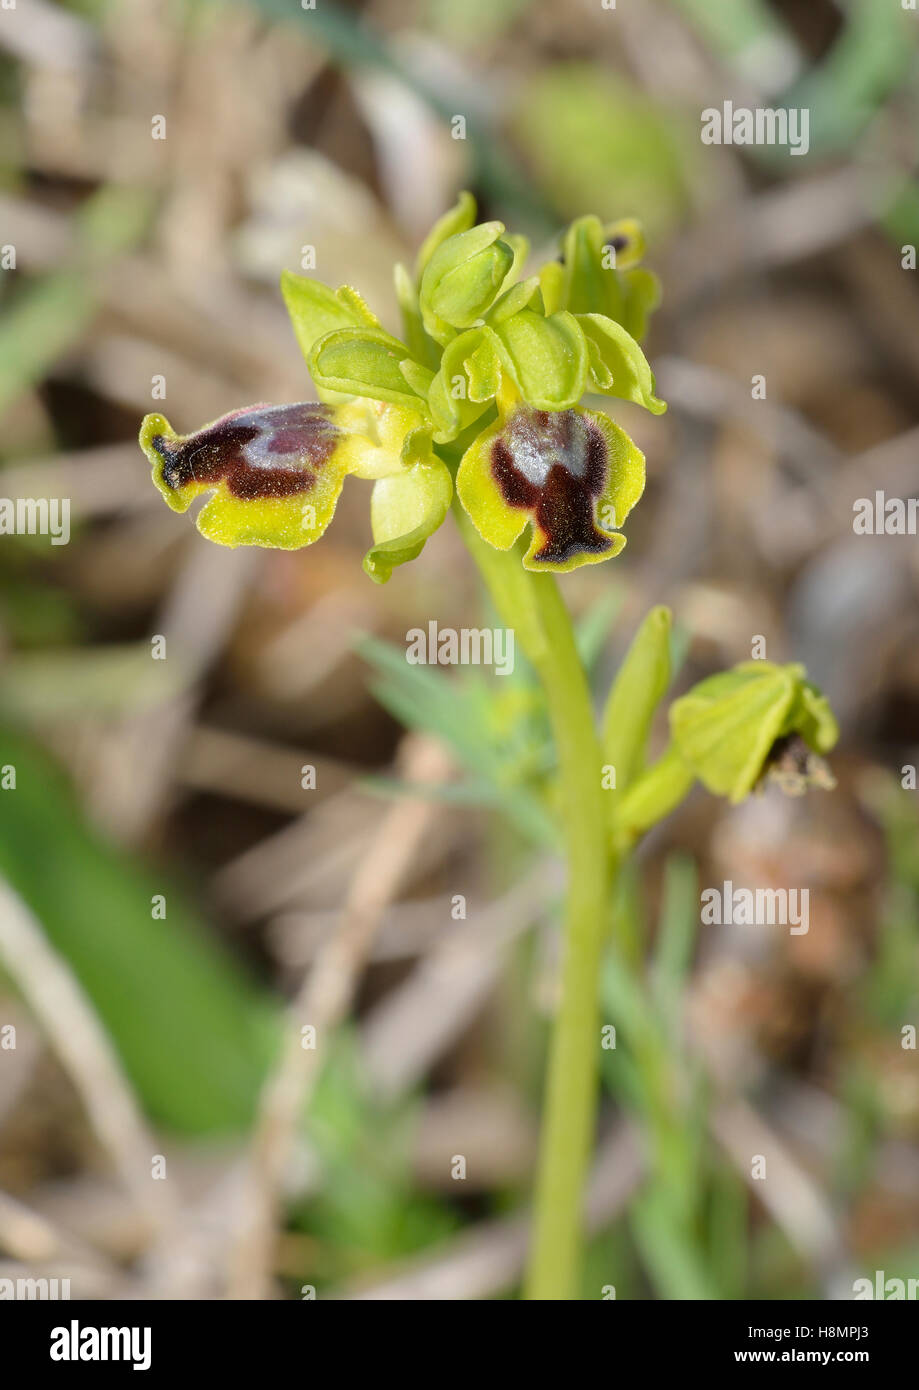 Ophrys lutea galilaea Subspecies of Yellow Bee Orchid from Cyprus Stock Photo